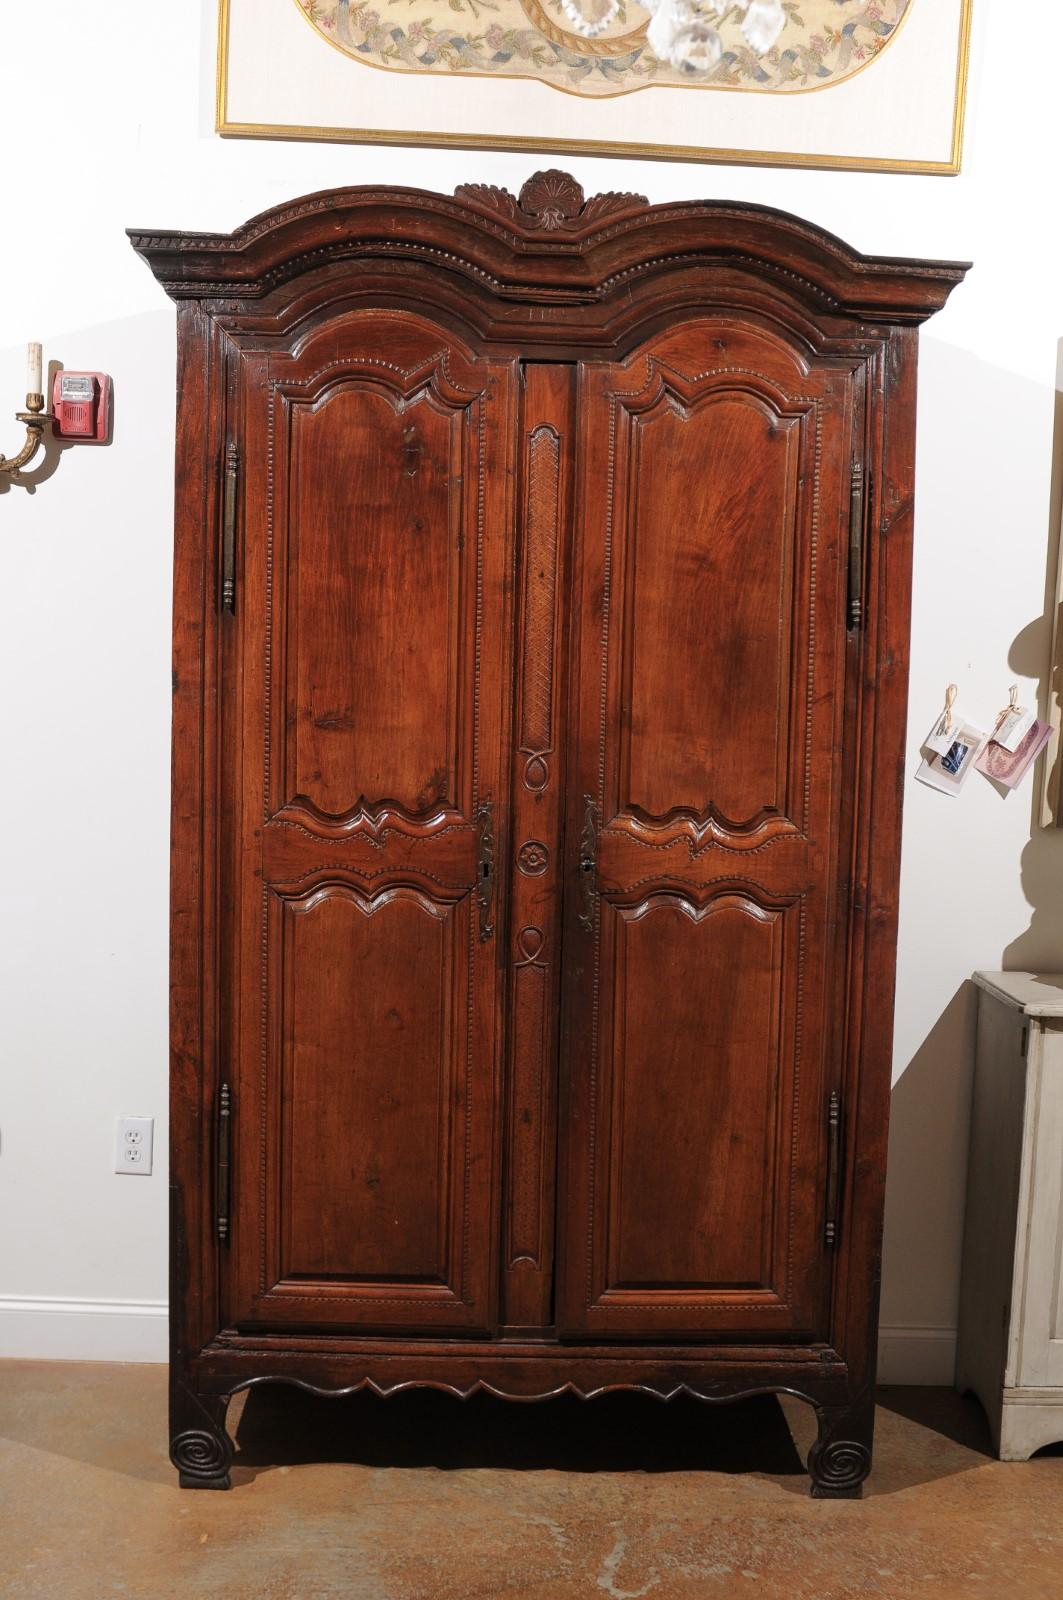 A French late 18th century wild cherry armoire from Rennes, dated 1792 at the cornice. Born in the capital of Brittany, Rennes in the last year of king Louis XVI reign, this French wild cherry armoire features a large double bonnet cornice, accented